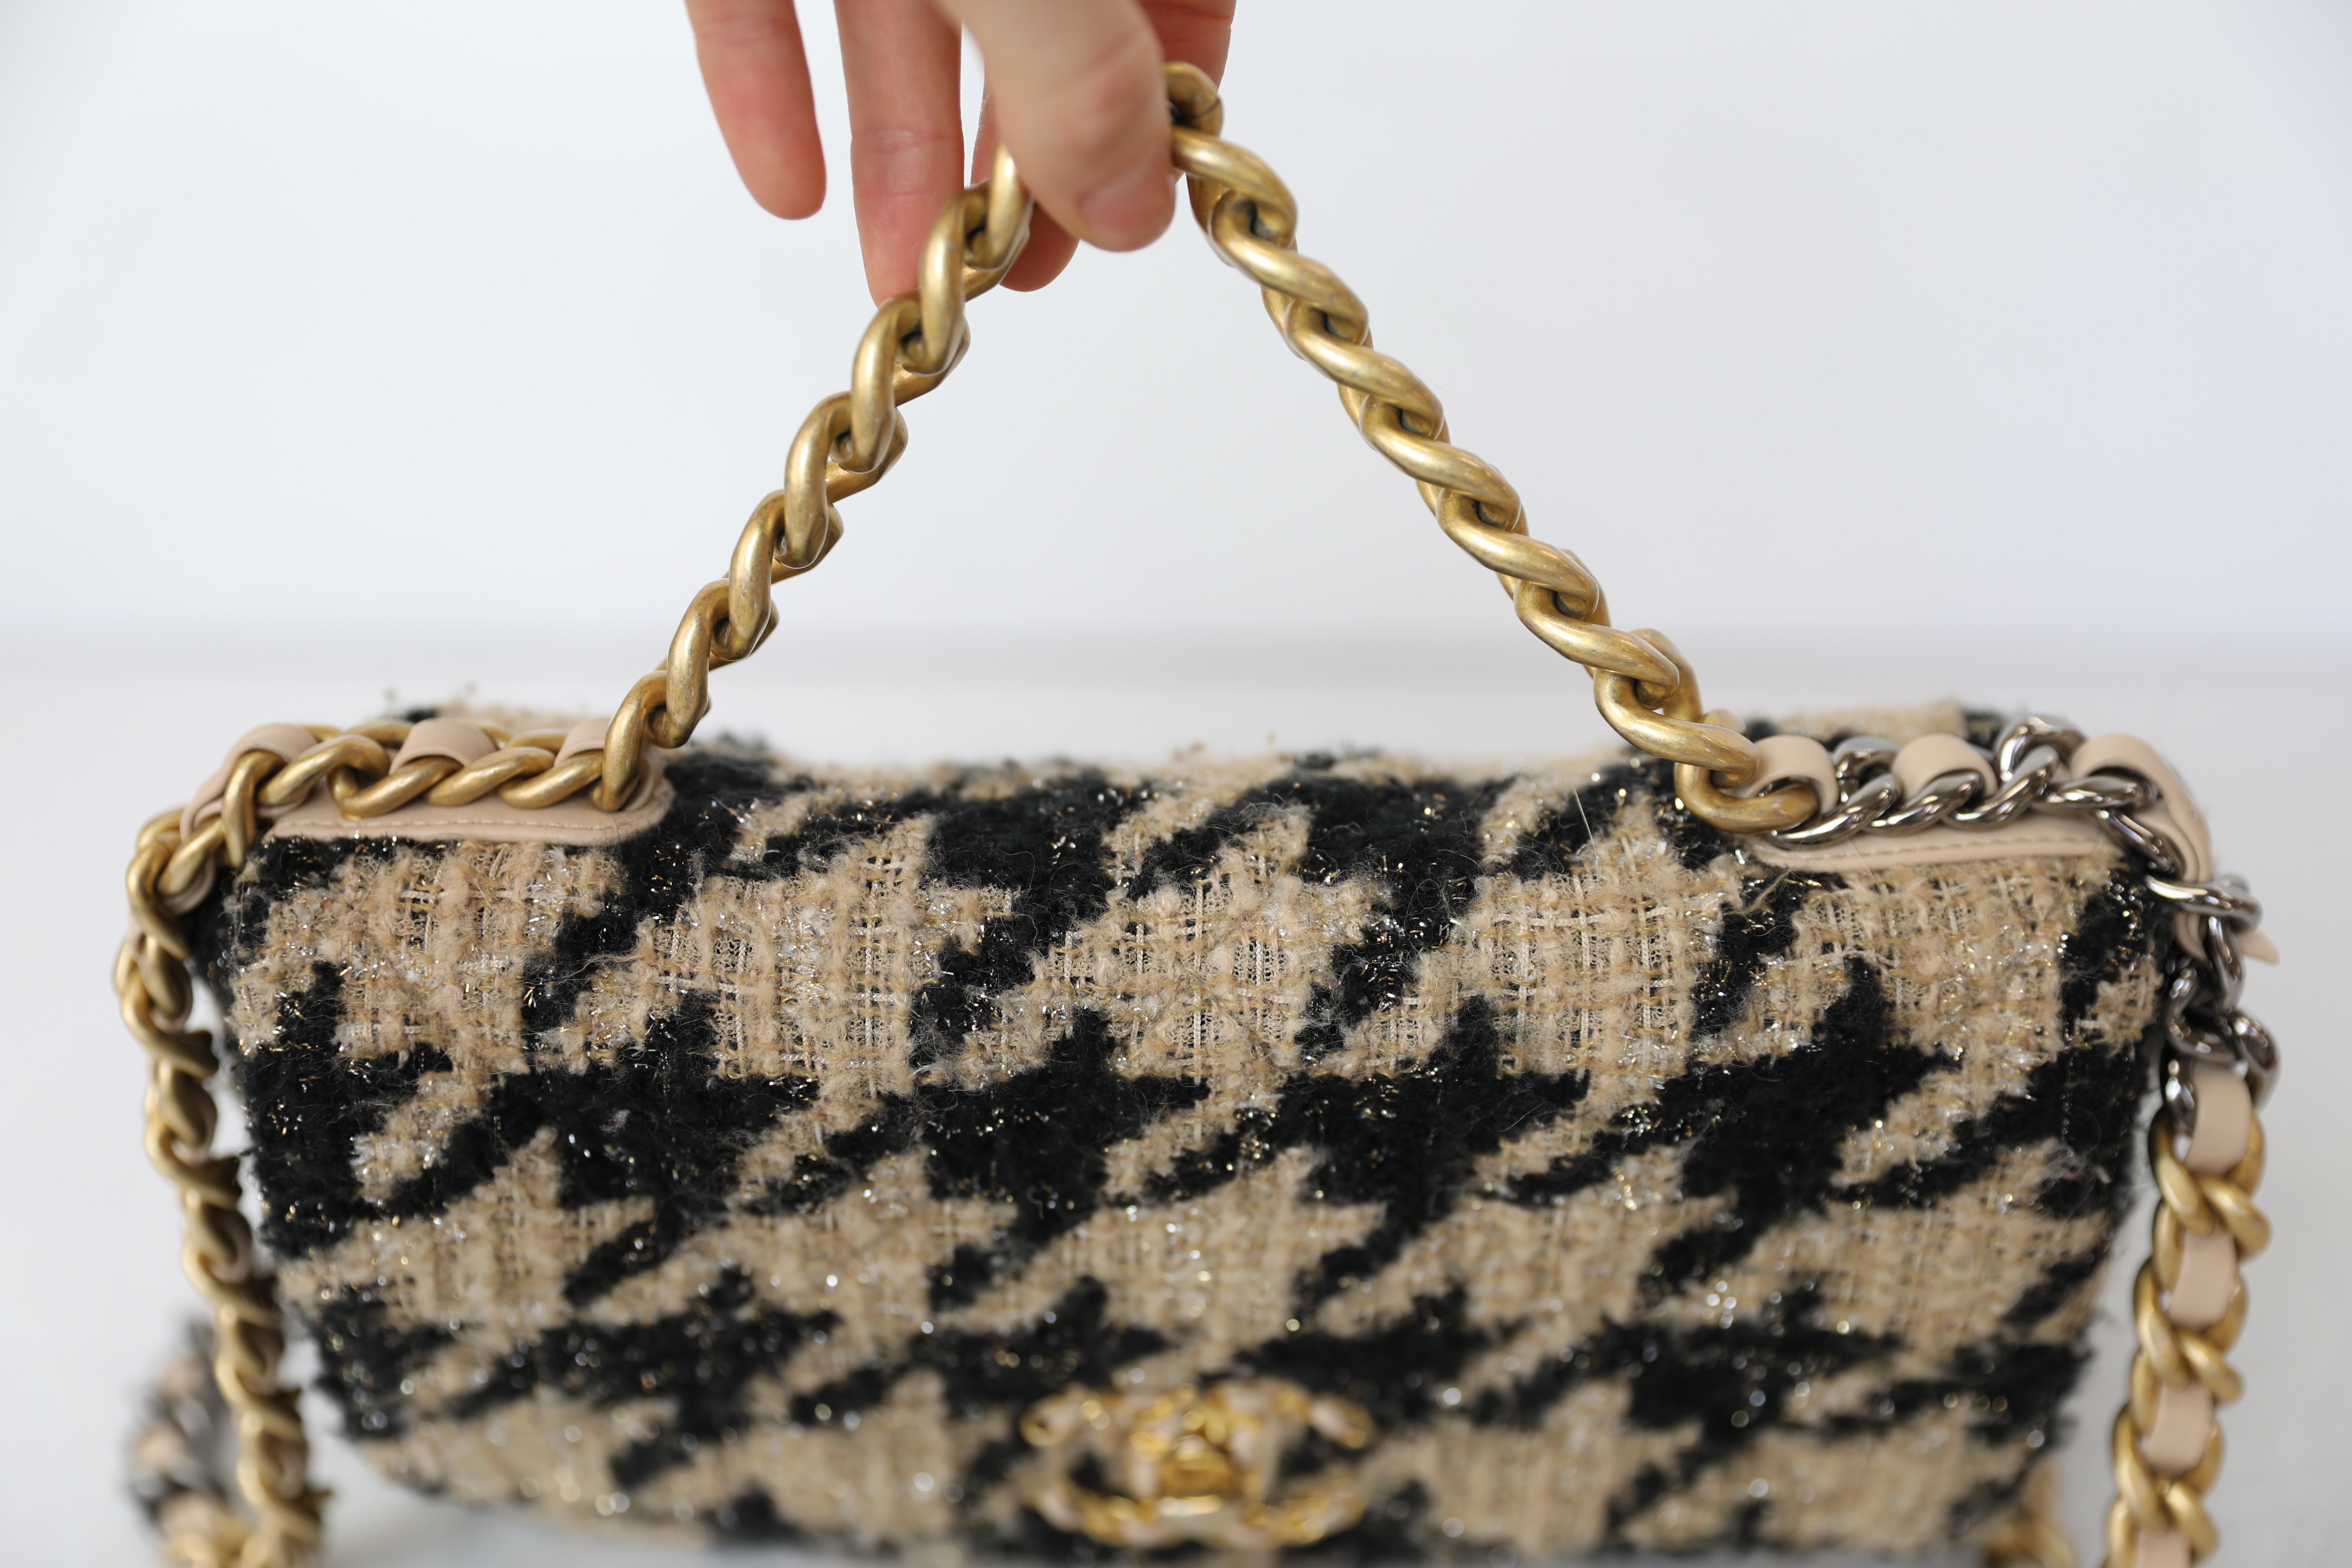 Chanel 19 Small, Beige and Black Houndstooth Tweed, Preowned in Dustbag  WA001 - Julia Rose Boston